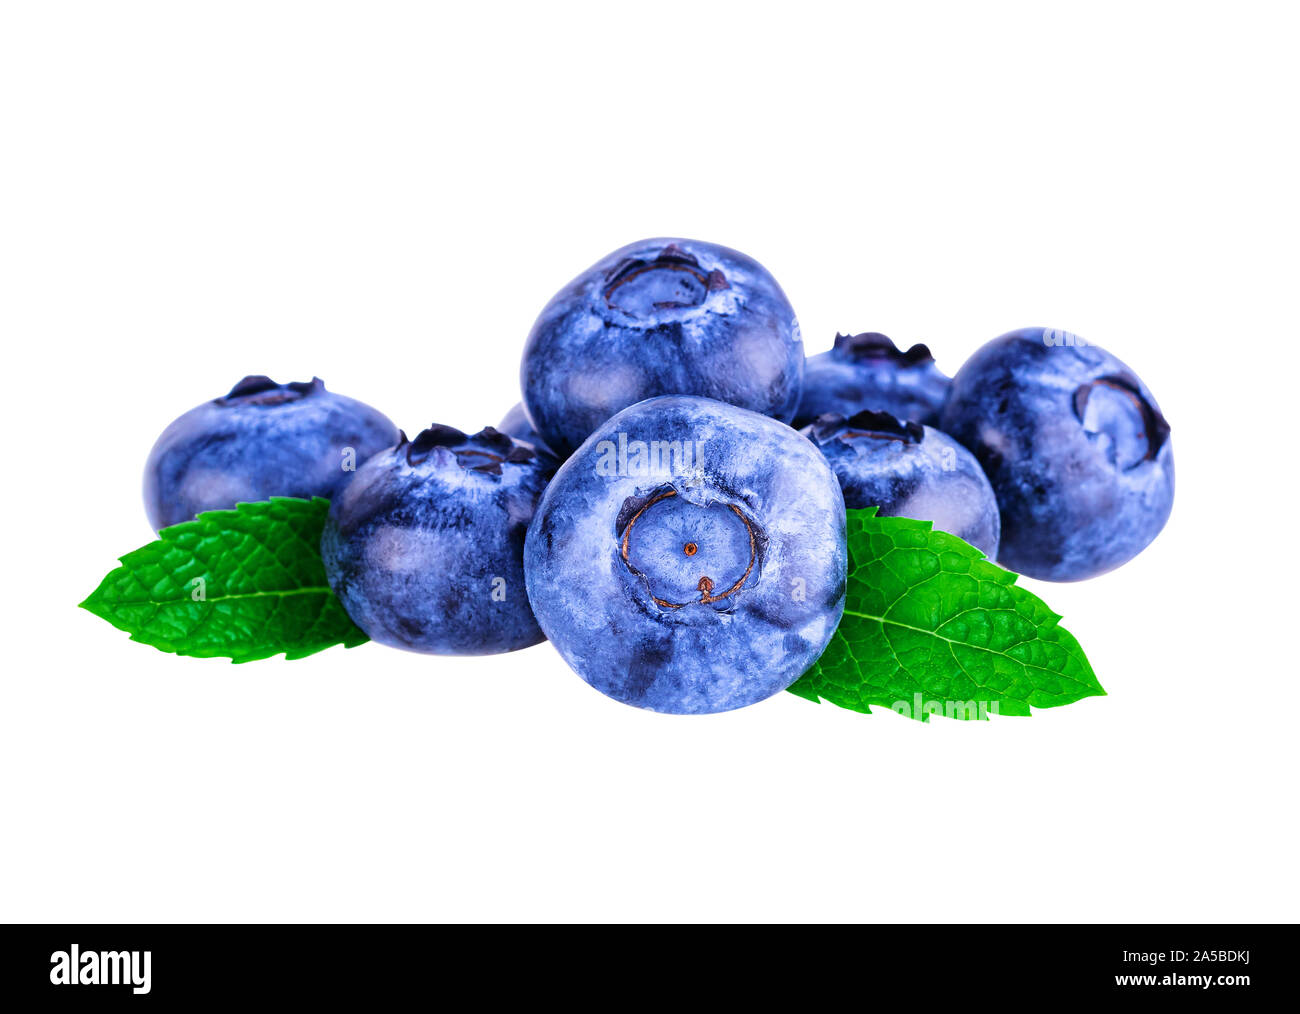 Blueberry. Heap of blueberries with mint leaf on white. Image included clipping path Stock Photo